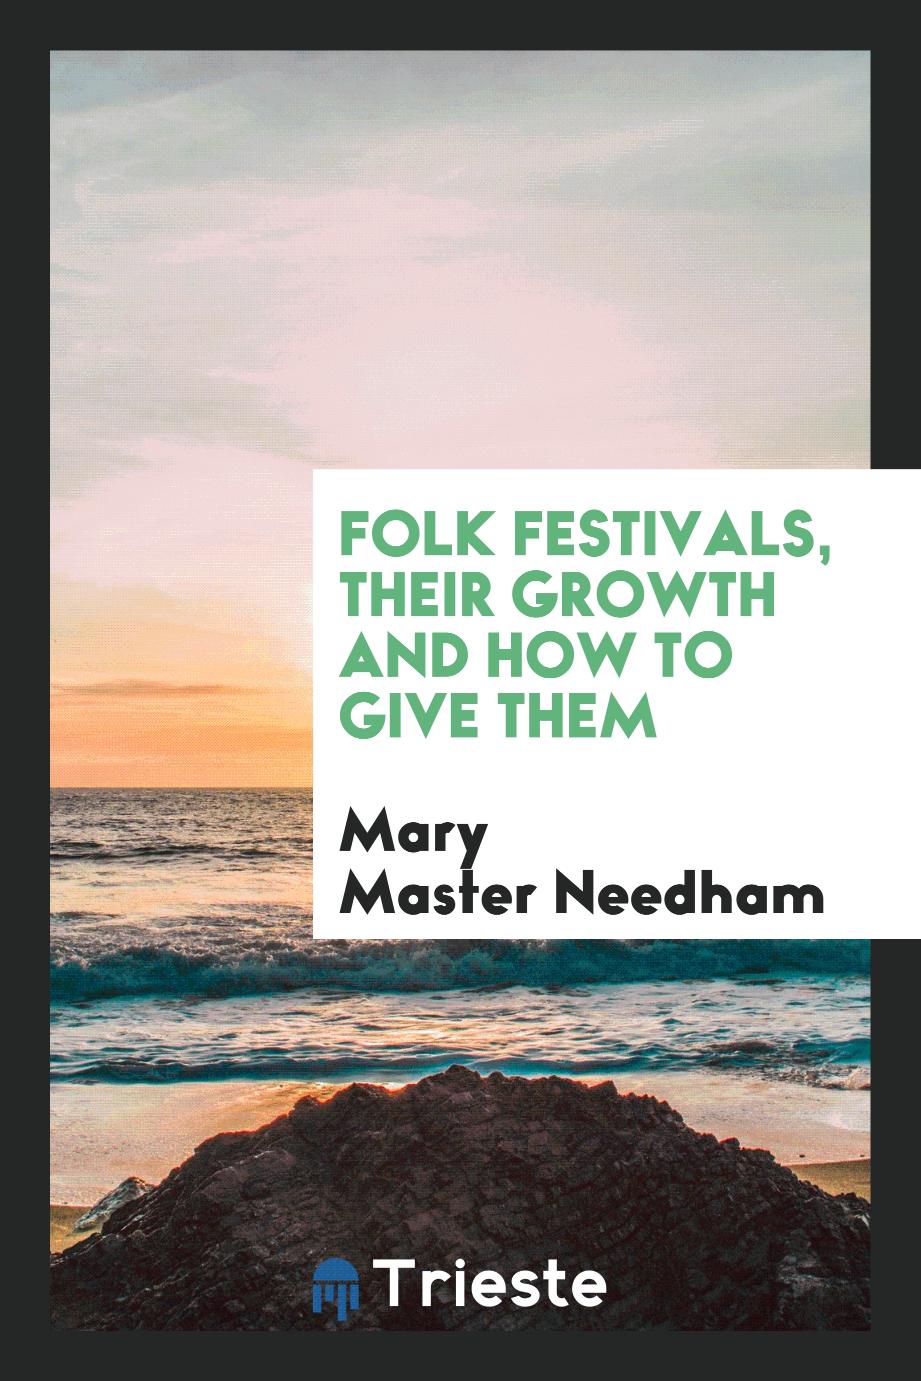 Folk festivals, their growth and how to give them